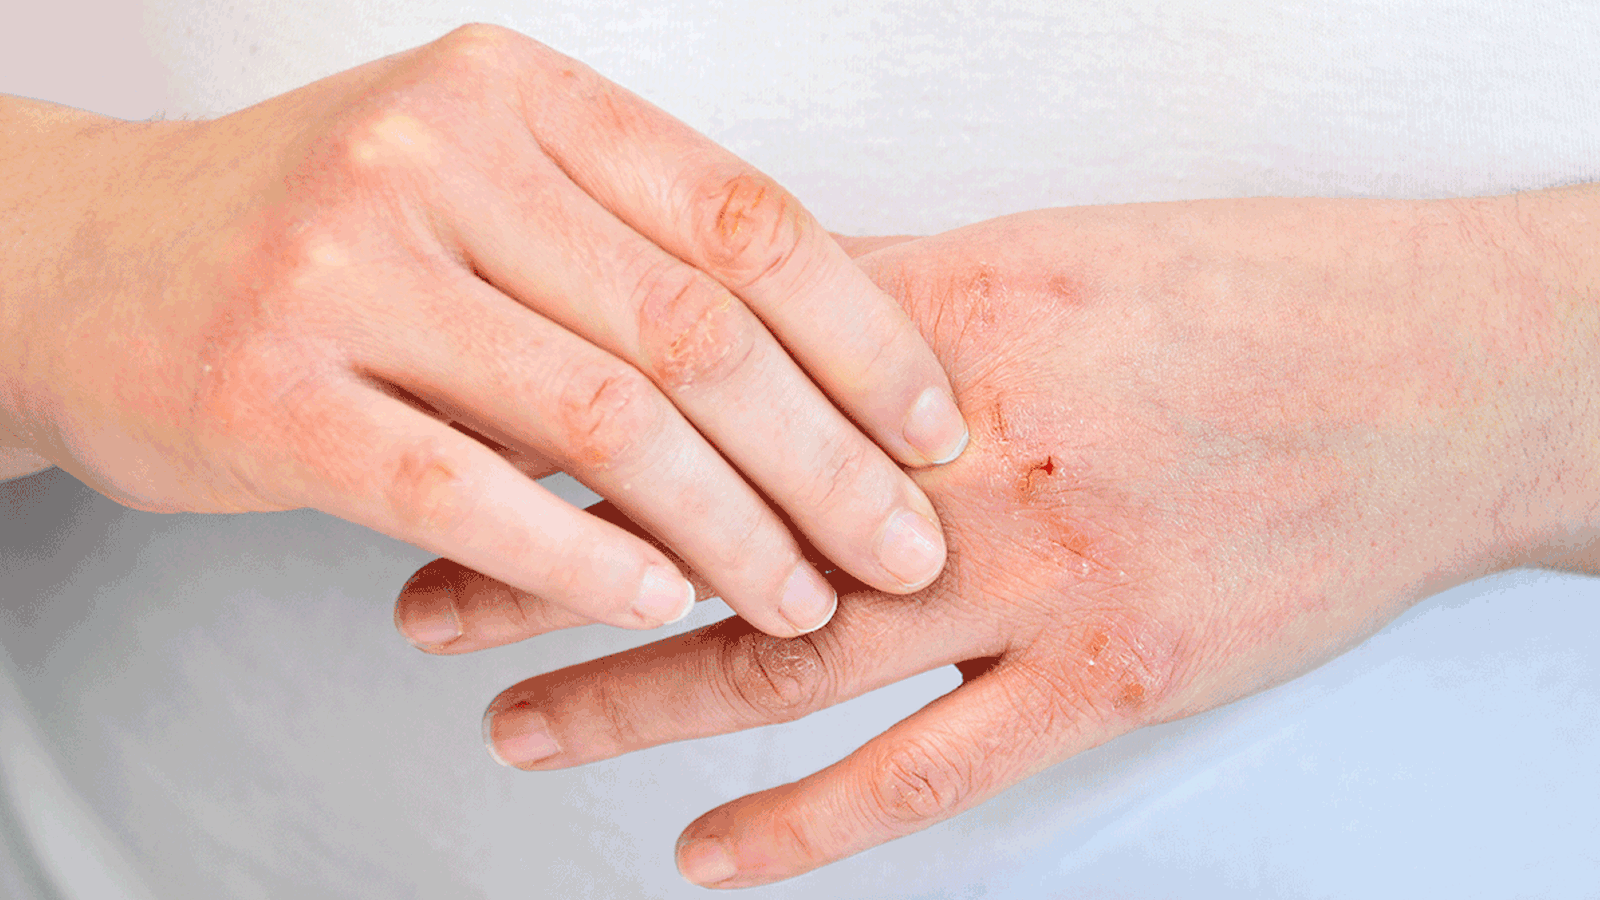 The image shows two hands, one hand gently resting on top of the other. The hand underneath exhibits several areas of inflamed skin, with visible redness and lesions